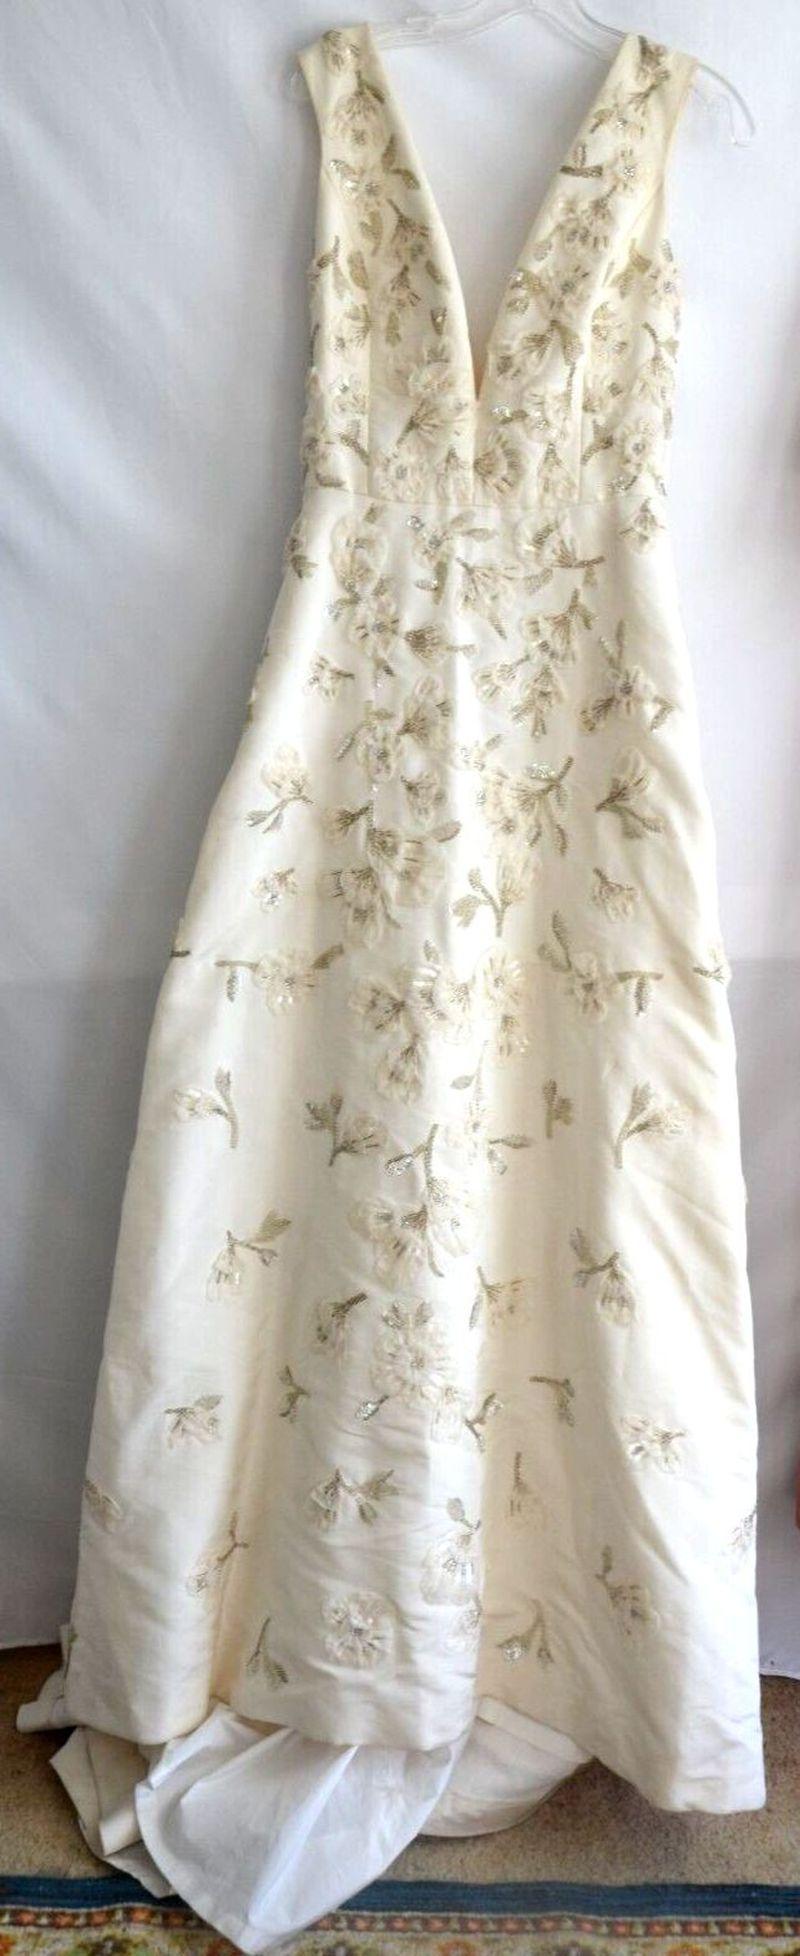 Size: US 10
Brand: Oscar de la Renta
Color: Ivory
Season: Spring 2017 Runway , Look 1
Composition: Silk; Lined
$16,990.00 USD Retail
Giovana style, with department store tag

Features: 
Intricate embellishments throughout
Long length
Flattering a